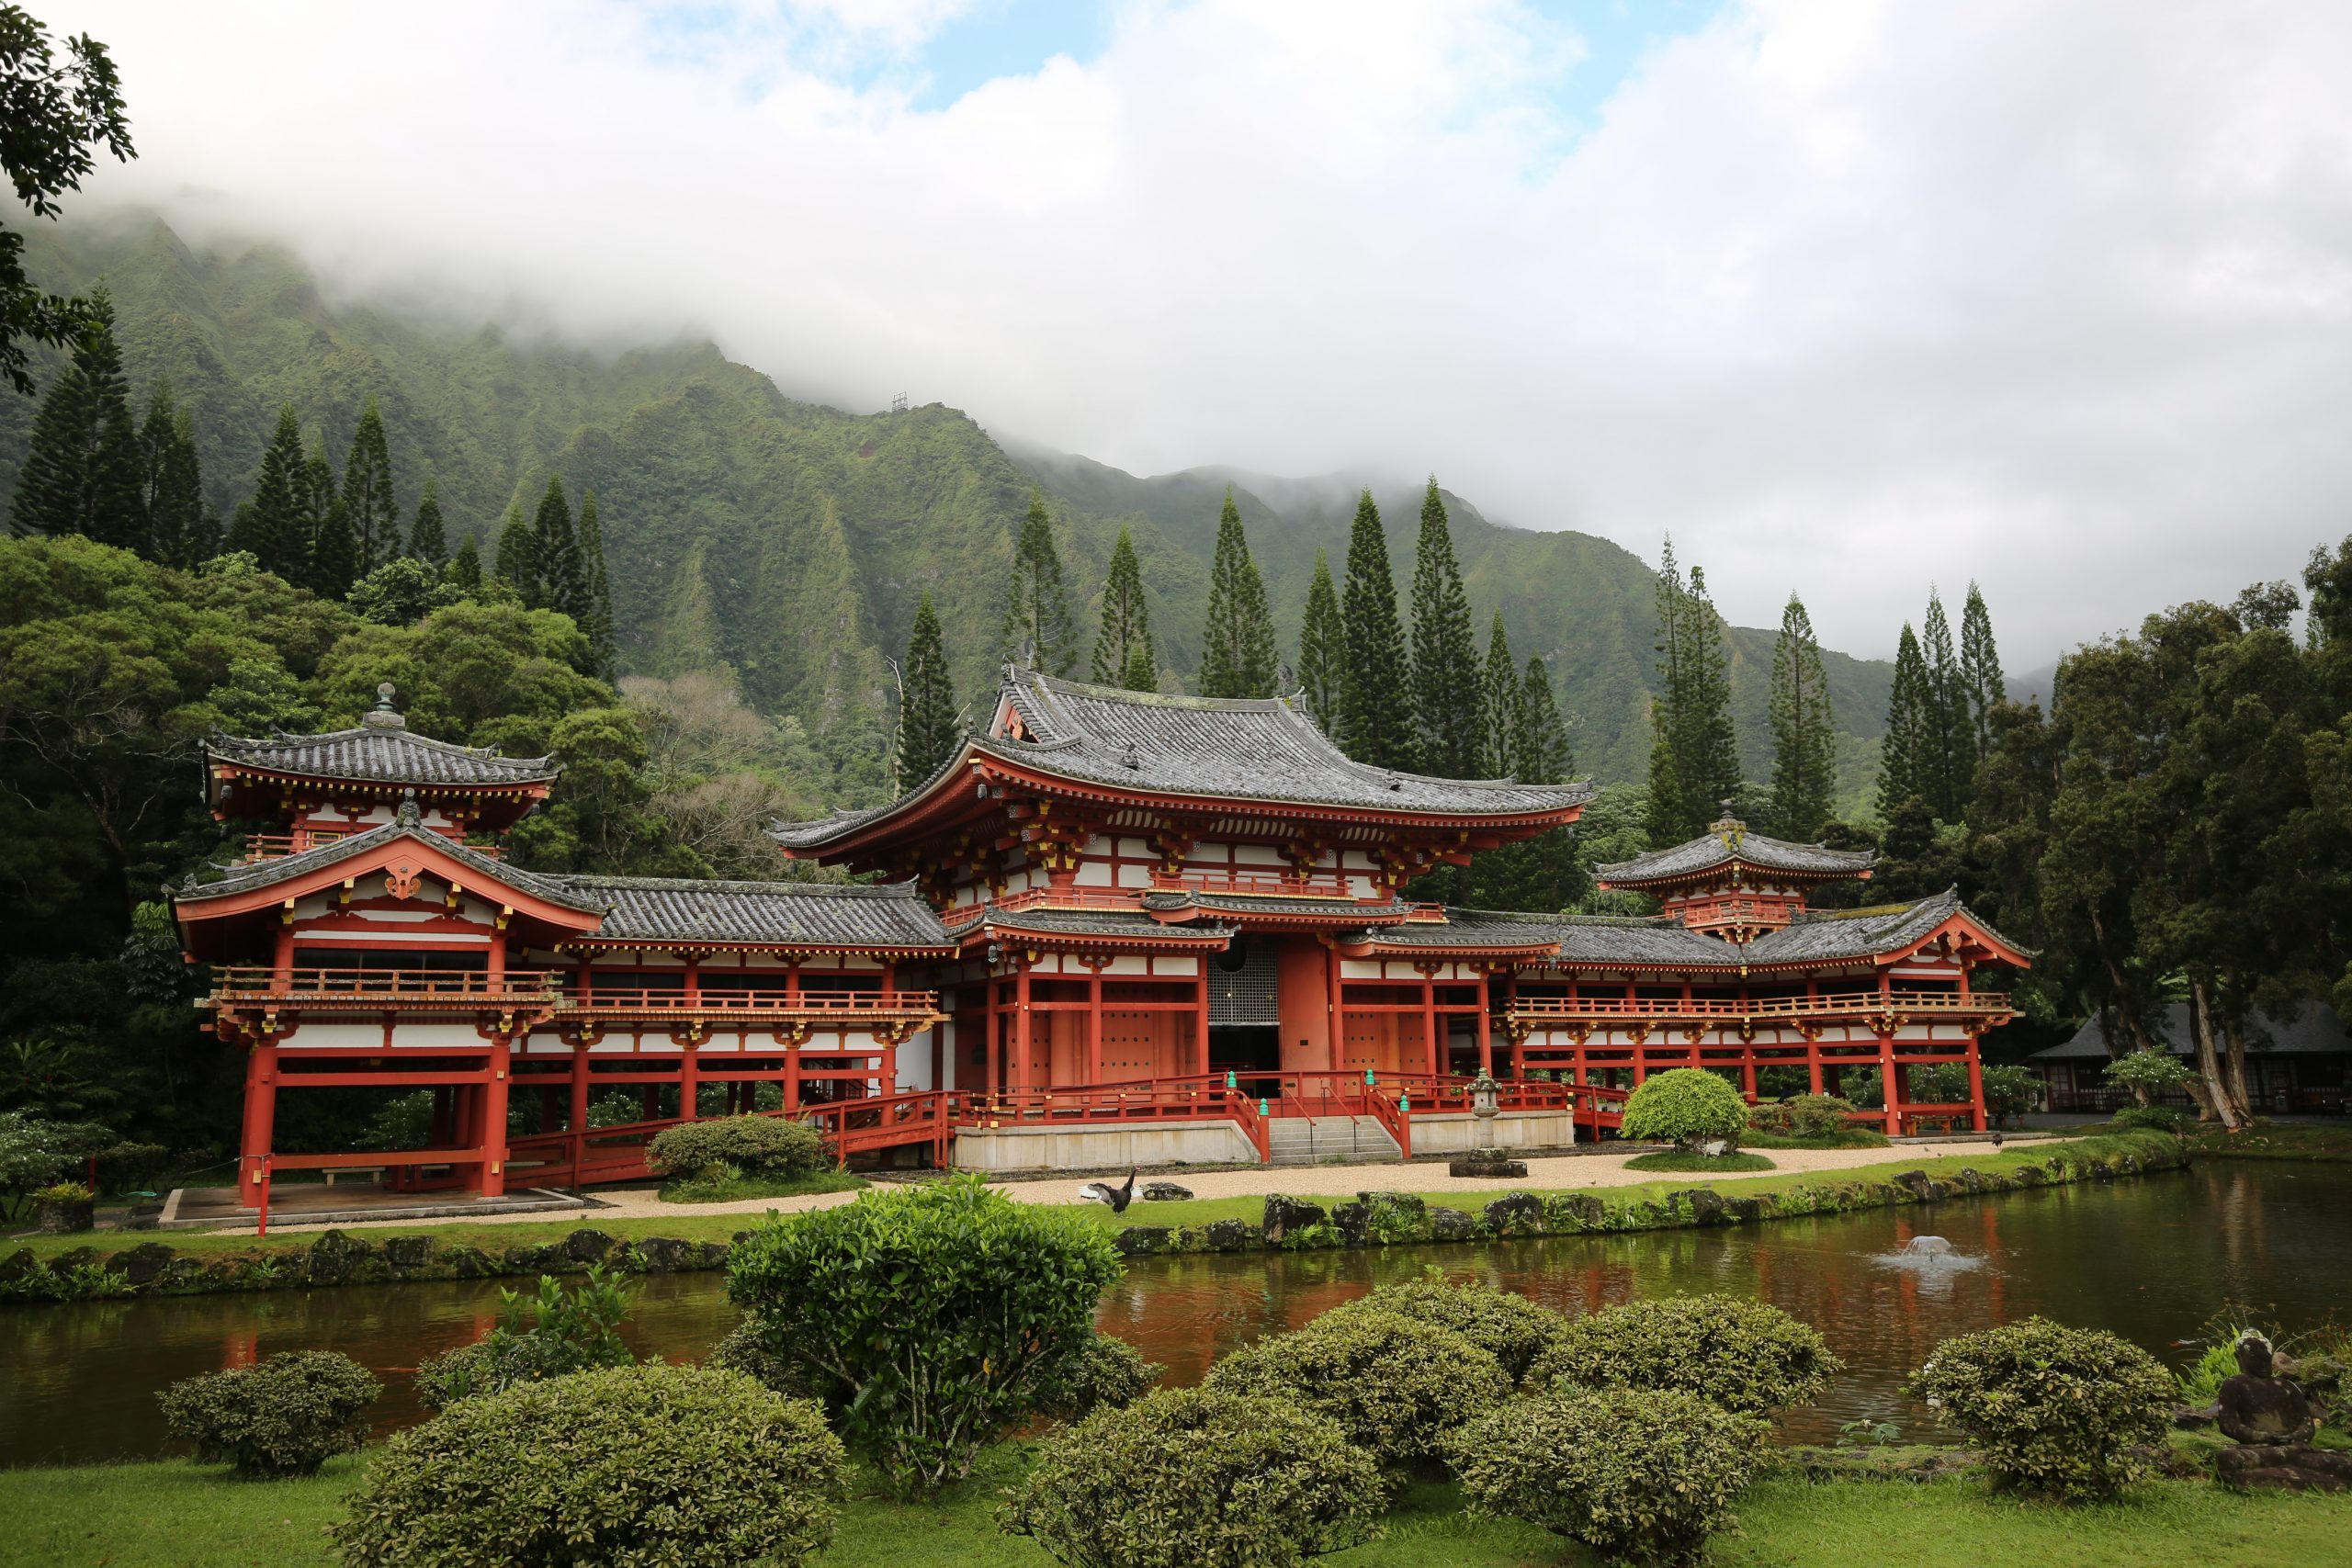 <p><a href="https://www.tripadvisor.com/Attraction_Review-g60653-d531862-Reviews-Byodo_In_Temple-Kaneohe_Oahu_Hawaii.html" rel="noopener">This 55-year-old temple</a> honors the anniversary of the first Japanese immigrants to Hawaii. It is a smaller replica of the Byodo-in Temple, a United Nations World Heritage site, in Uji, Japan, and people of all faiths are welcome to worship, <a href="https://www.rd.com/article/how-to-meditate/">meditate</a> or simply appreciate the temple. You might also recognize the temple from shows like <em>Lost</em>, <em>Hawaii Five-O</em> and <em>Magnum, P.I</em>. The grounds are open daily with admission costing no more than $5.</p> <p class="listicle-page__cta-button-shop"><a class="shop-btn" href="https://www.tripadvisor.com/Attraction_Review-g60653-d531862-Reviews-Byodo_In_Temple-Kaneohe_Oahu_Hawaii.html">Learn More</a></p>